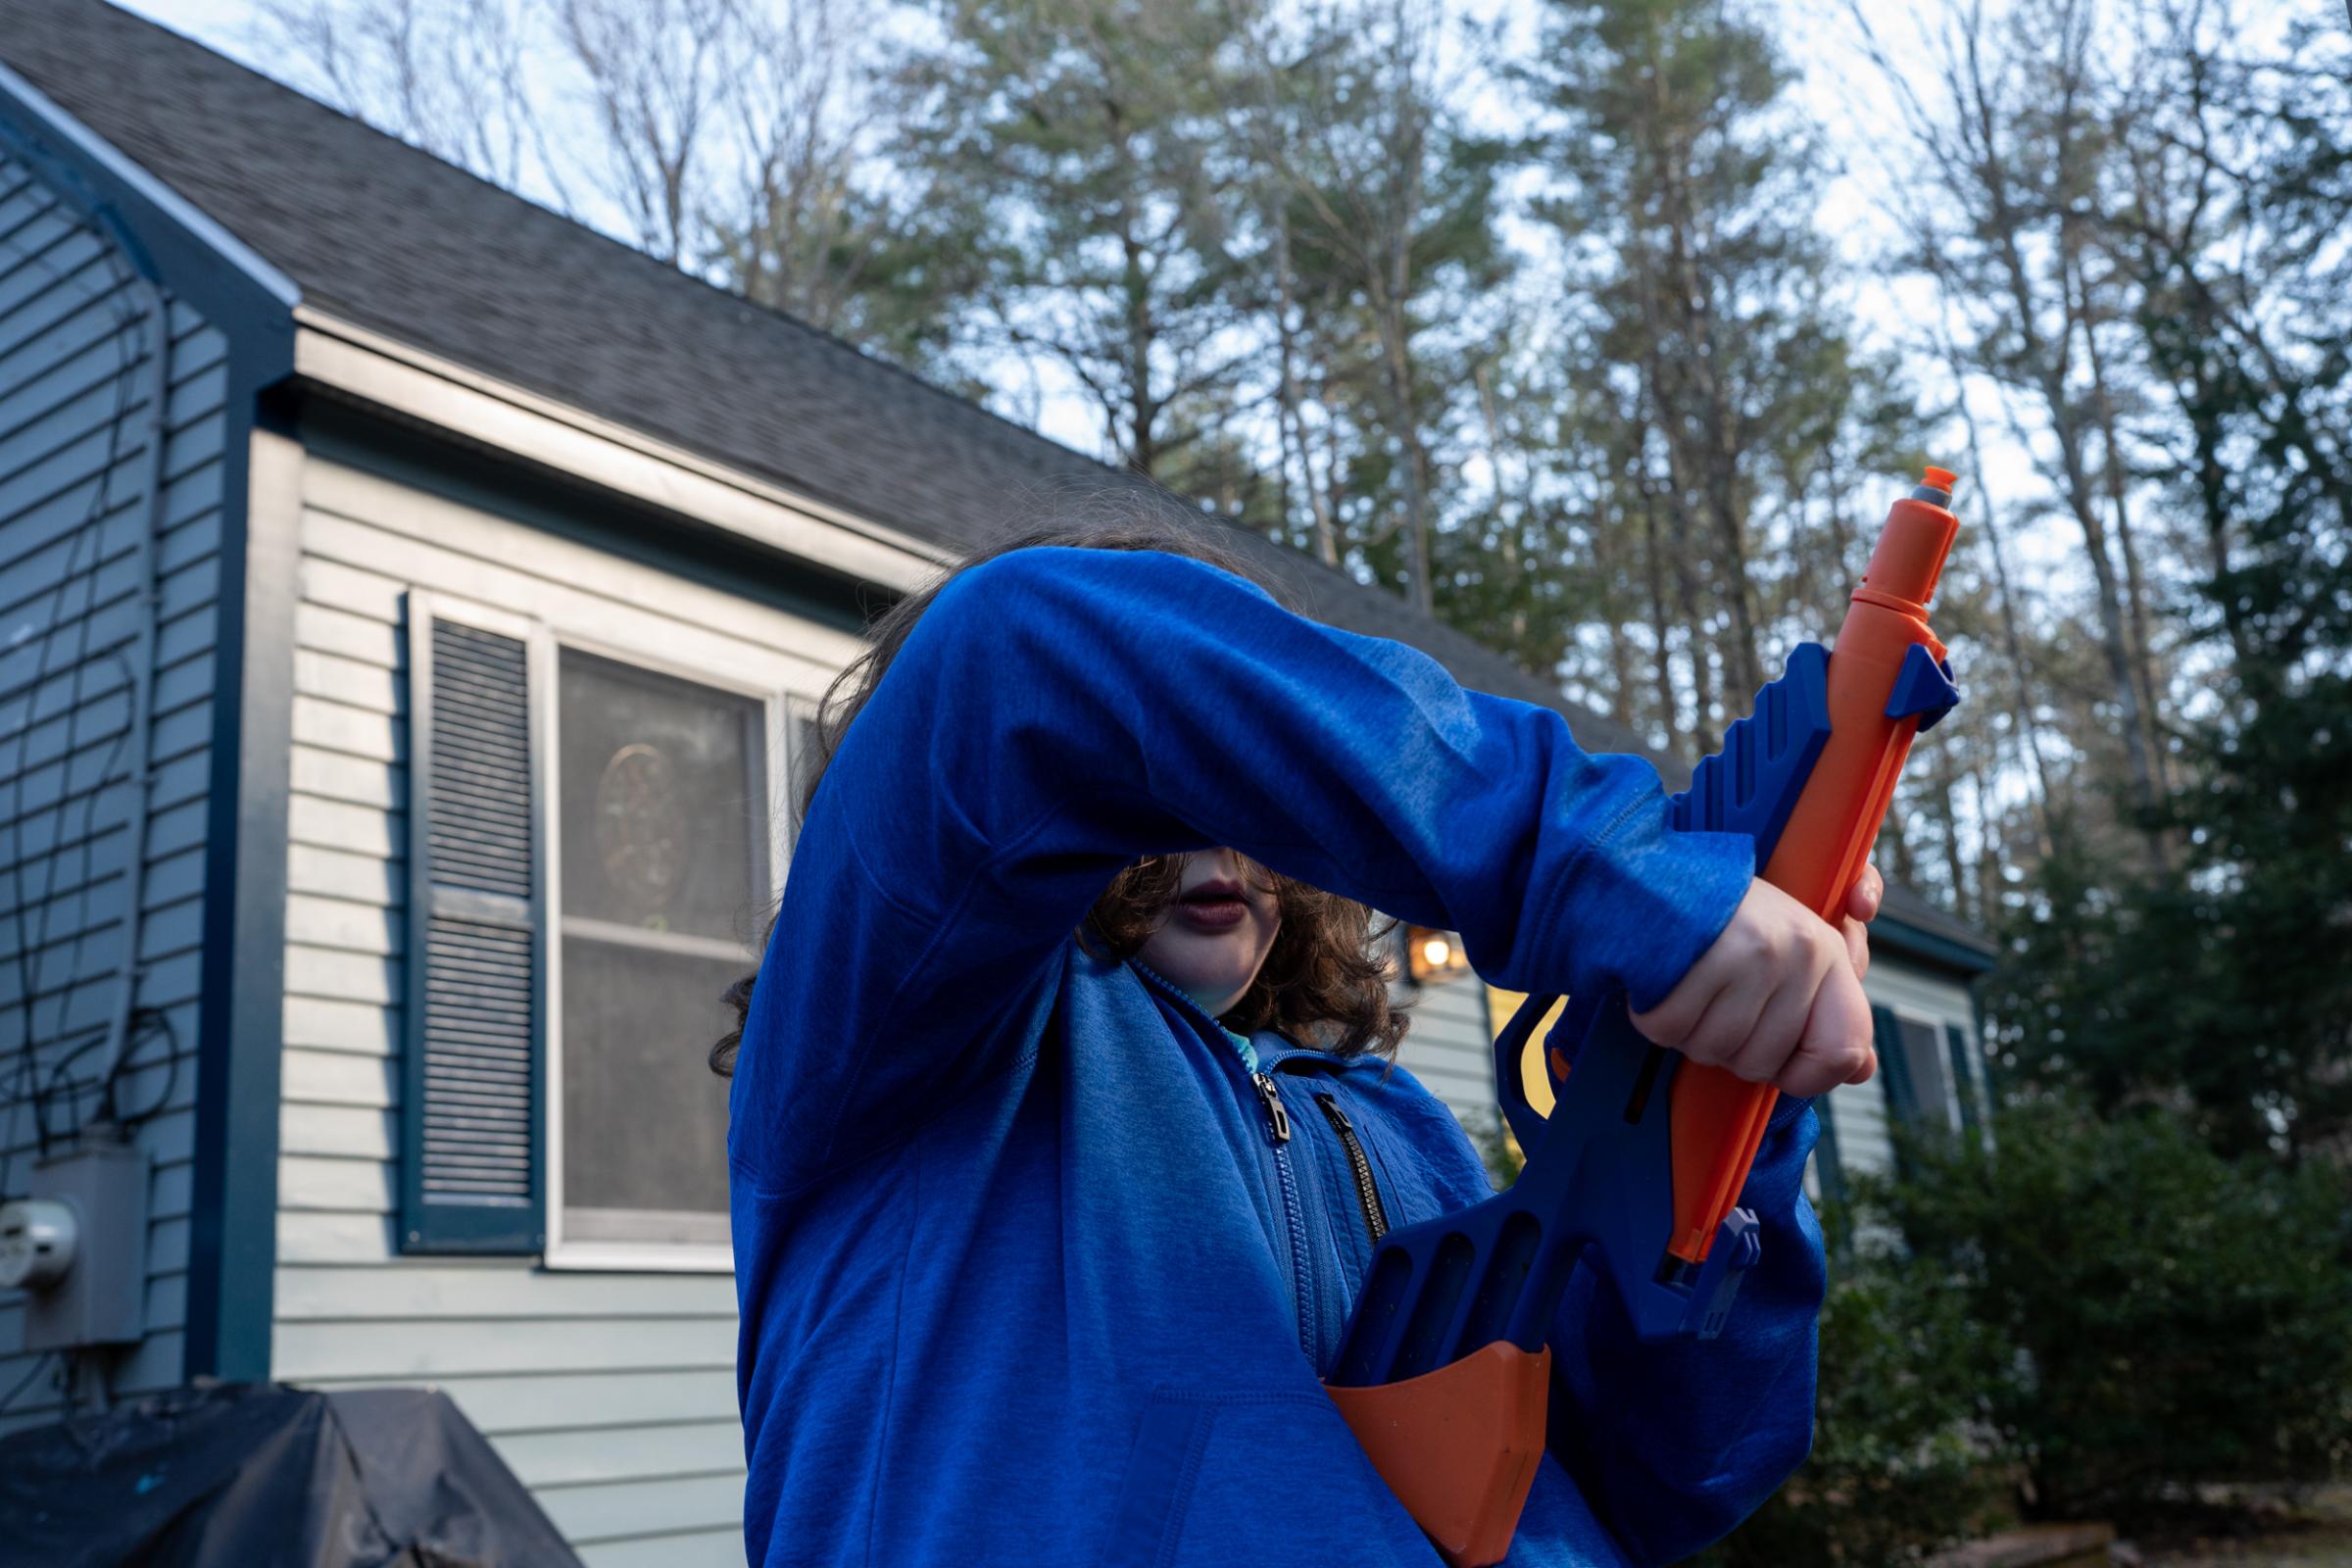 Science Magazine - Long Covid - Jaxson (9) plays with a toy gun in the yard, South...